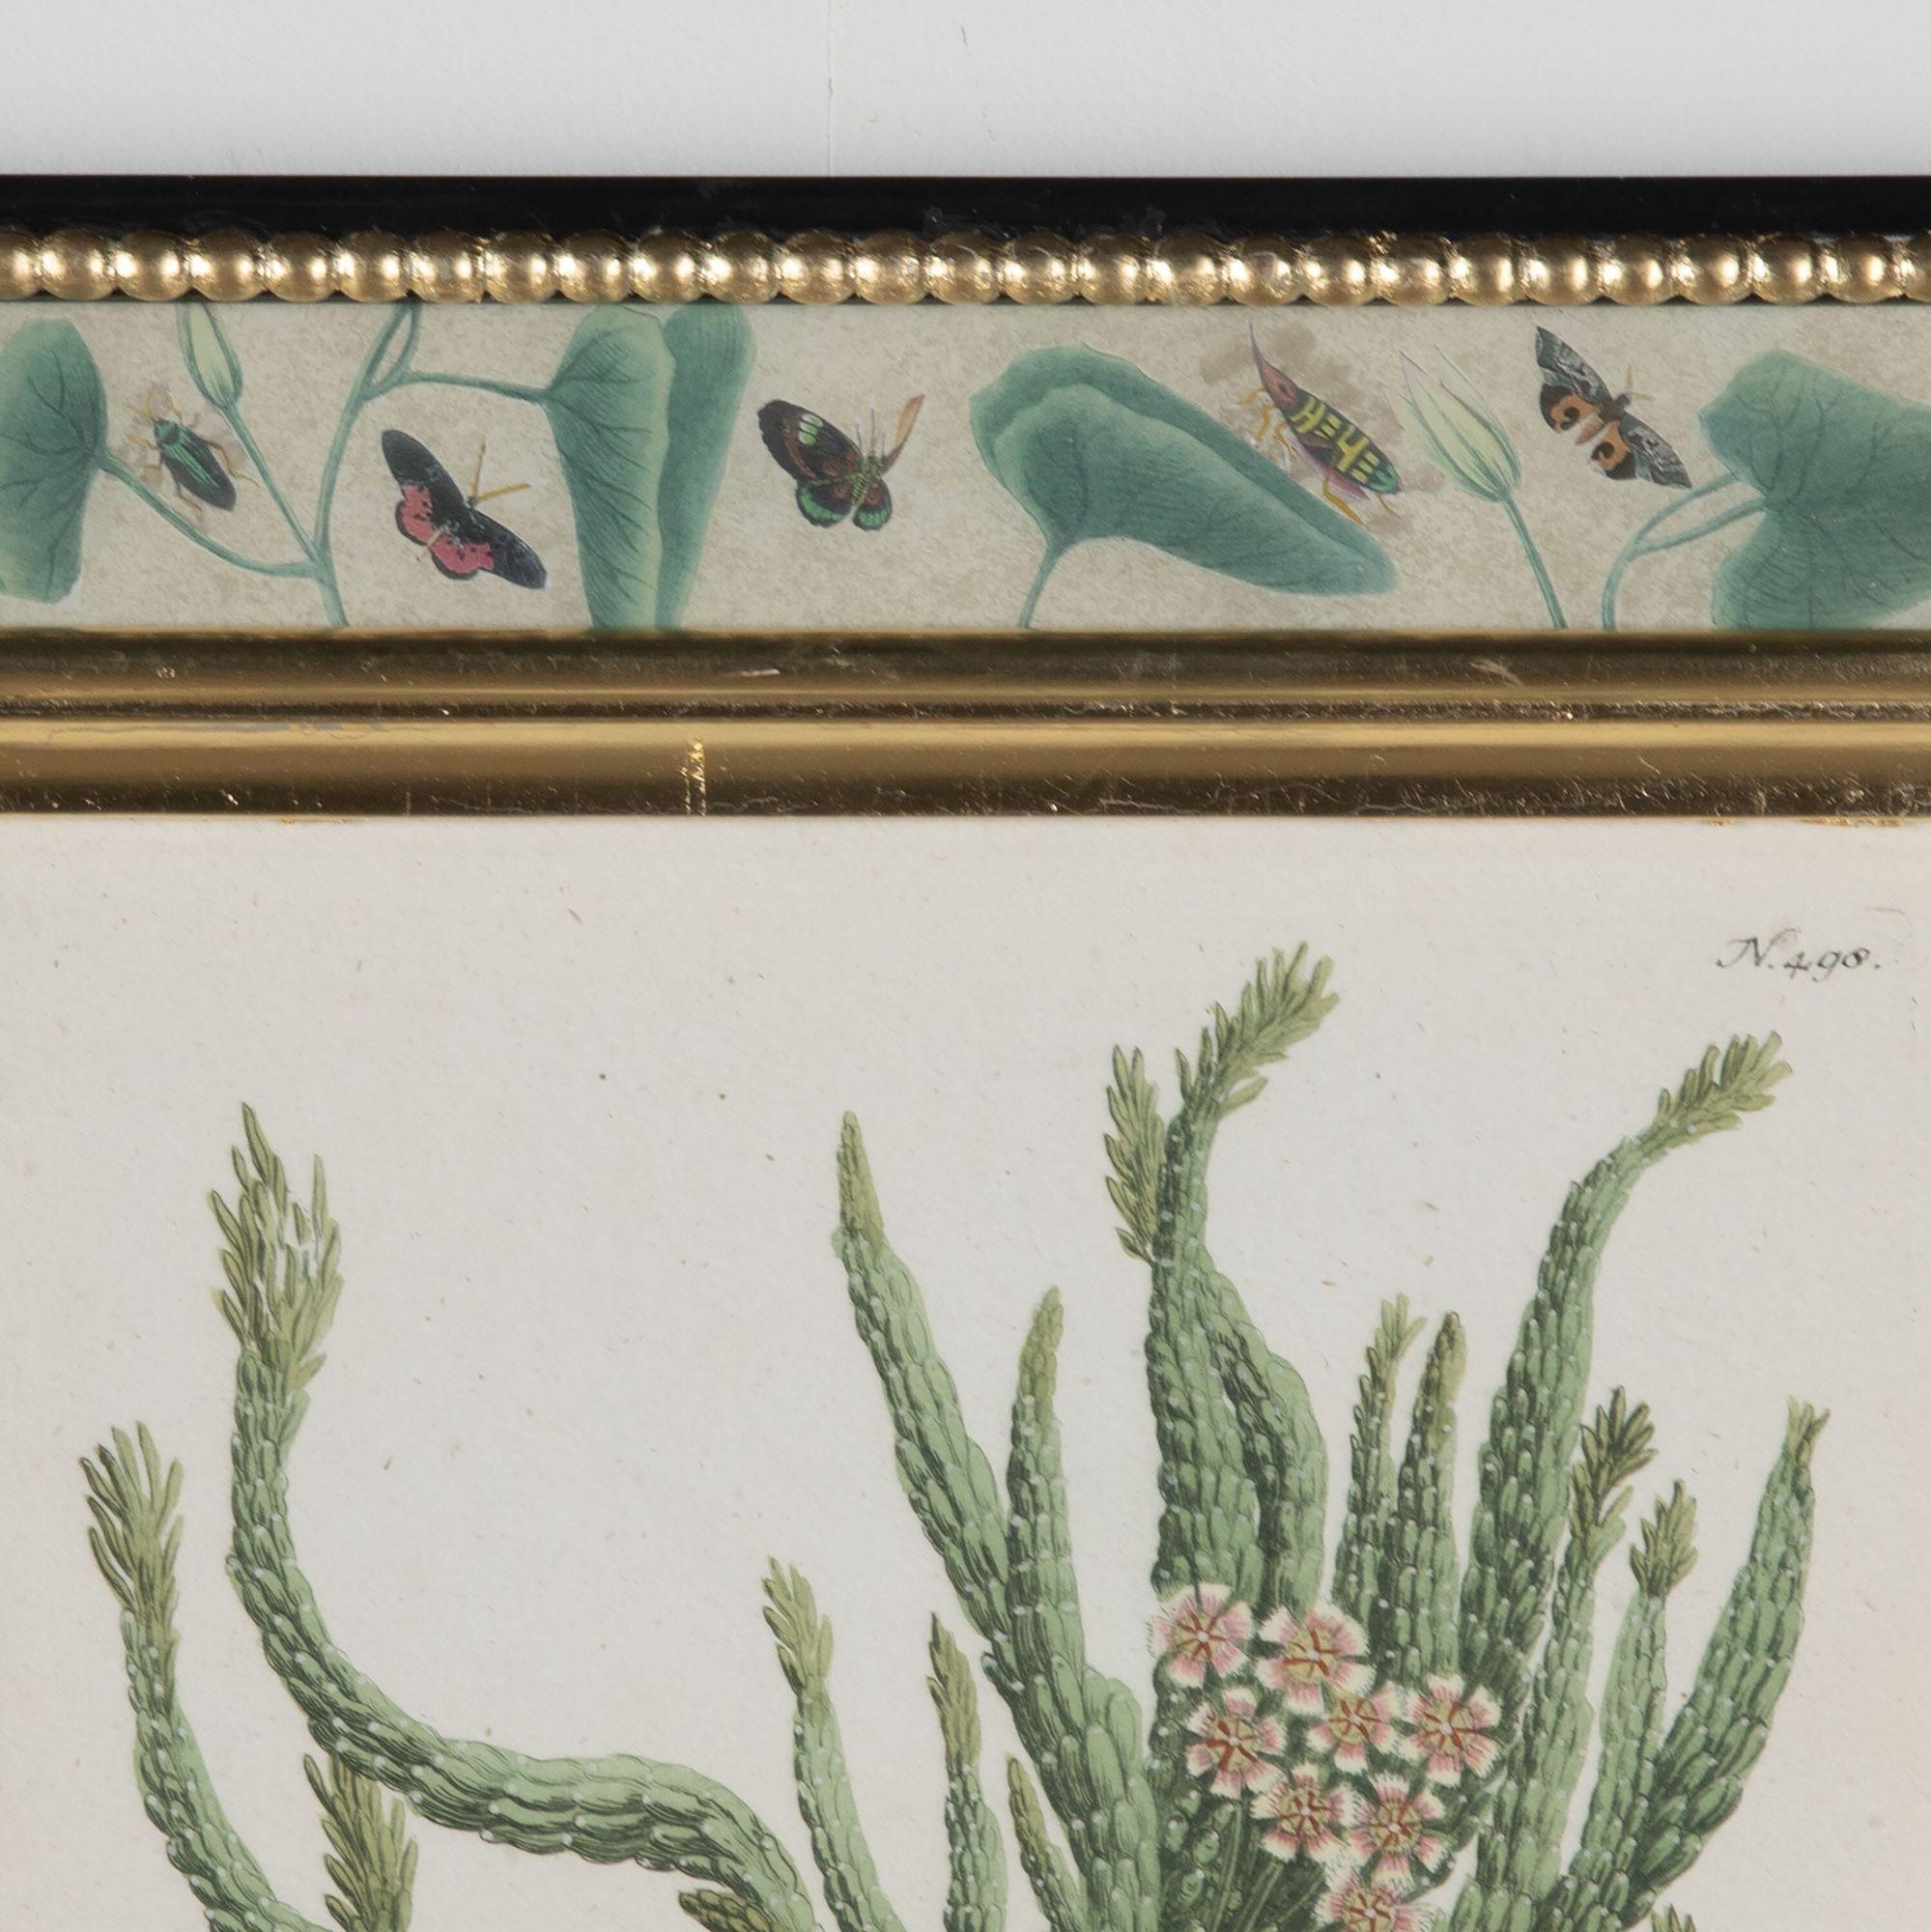 Set of twelve 18th century botanical engravings by Weinmann. 

These beautiful engravings depict a variety of species including, Acer, Amarathus, Geranium and Wild Garlic.
They come from Johann Wilhelm Weinmann's seminal work, the Phytanthoza